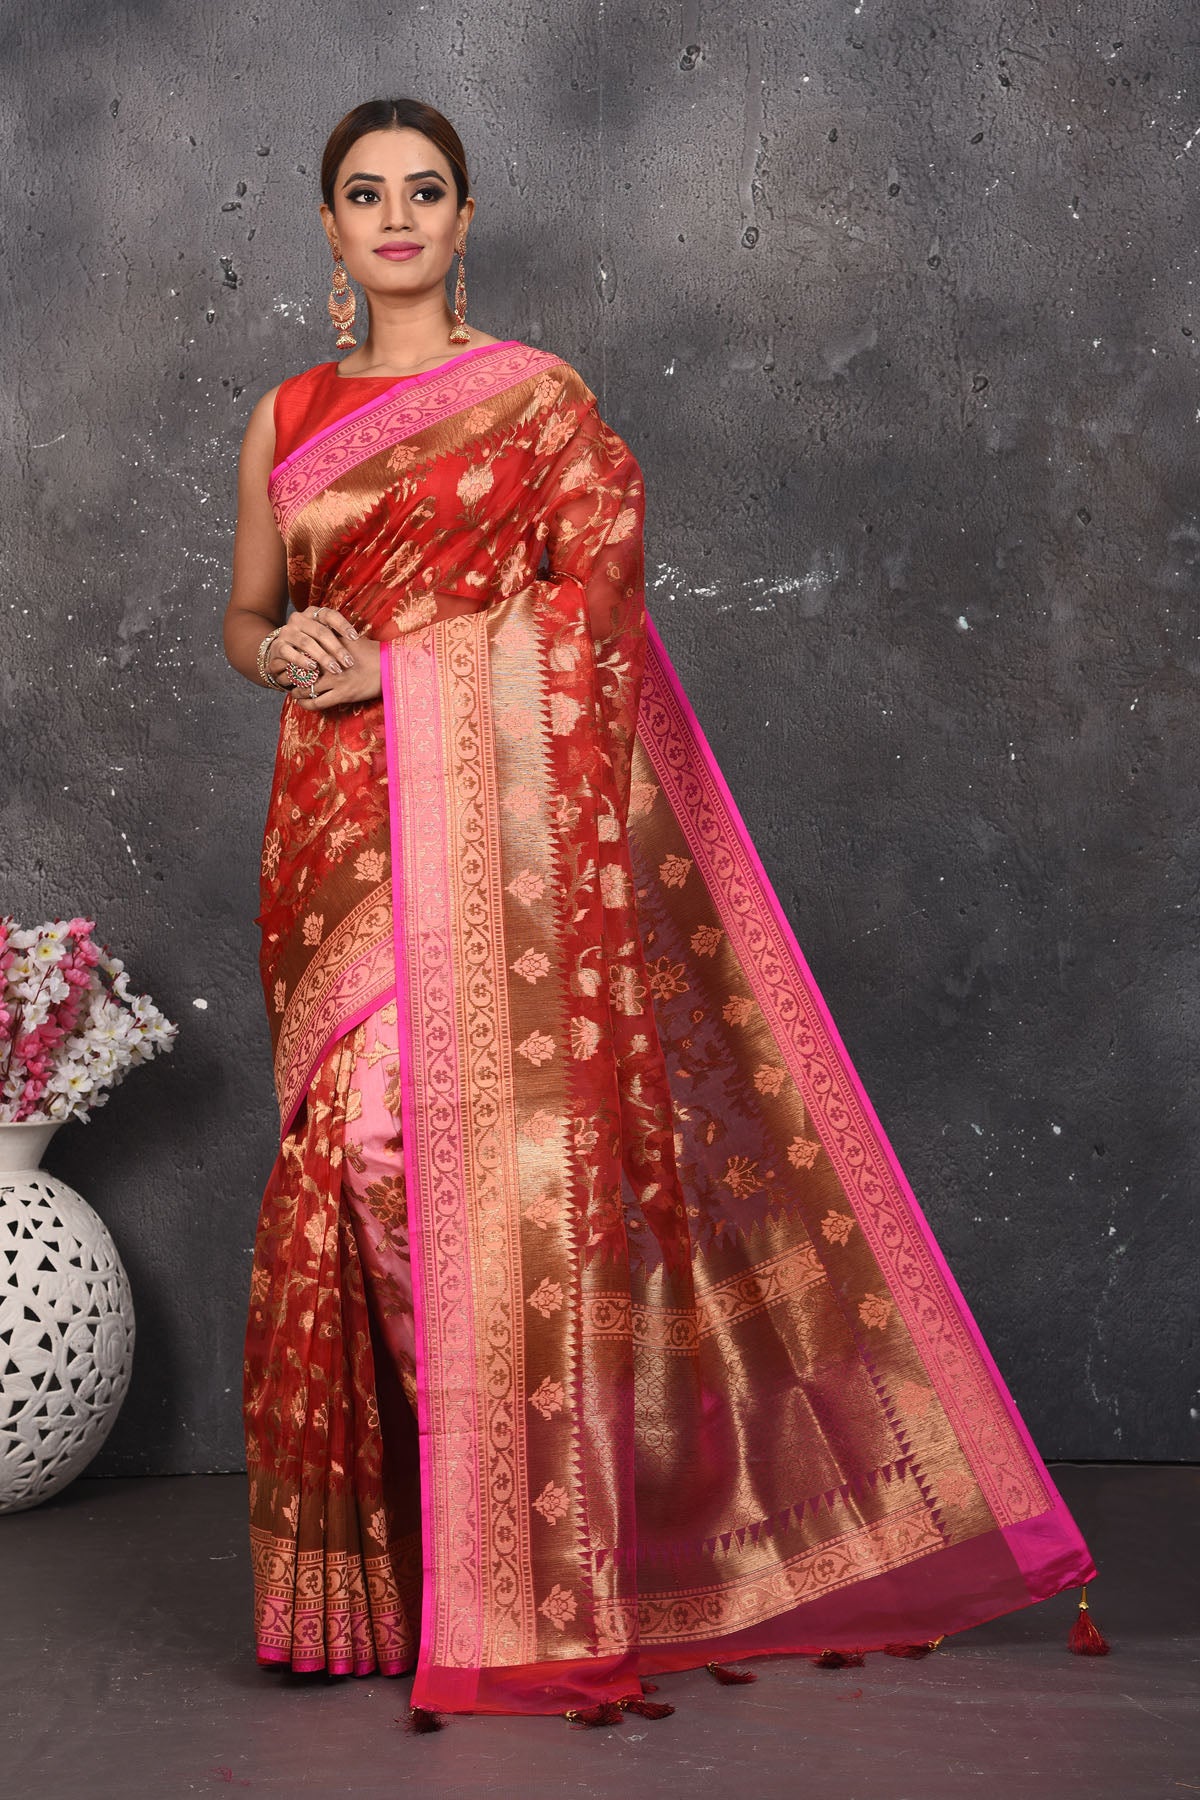 Buy this dazzling red kora silk handloom banarasi saree adorned with stunning resham and intricate Meenakari detailing along the border and pallu online in USA.  This Red color kora silk handloom Banarasi saree with pink-golden zari border in the comes with Unstitched blouse. Add this kora silk lace designer sari from Pure Elegance Indian fashion store in USA.- Full view with folded hands.